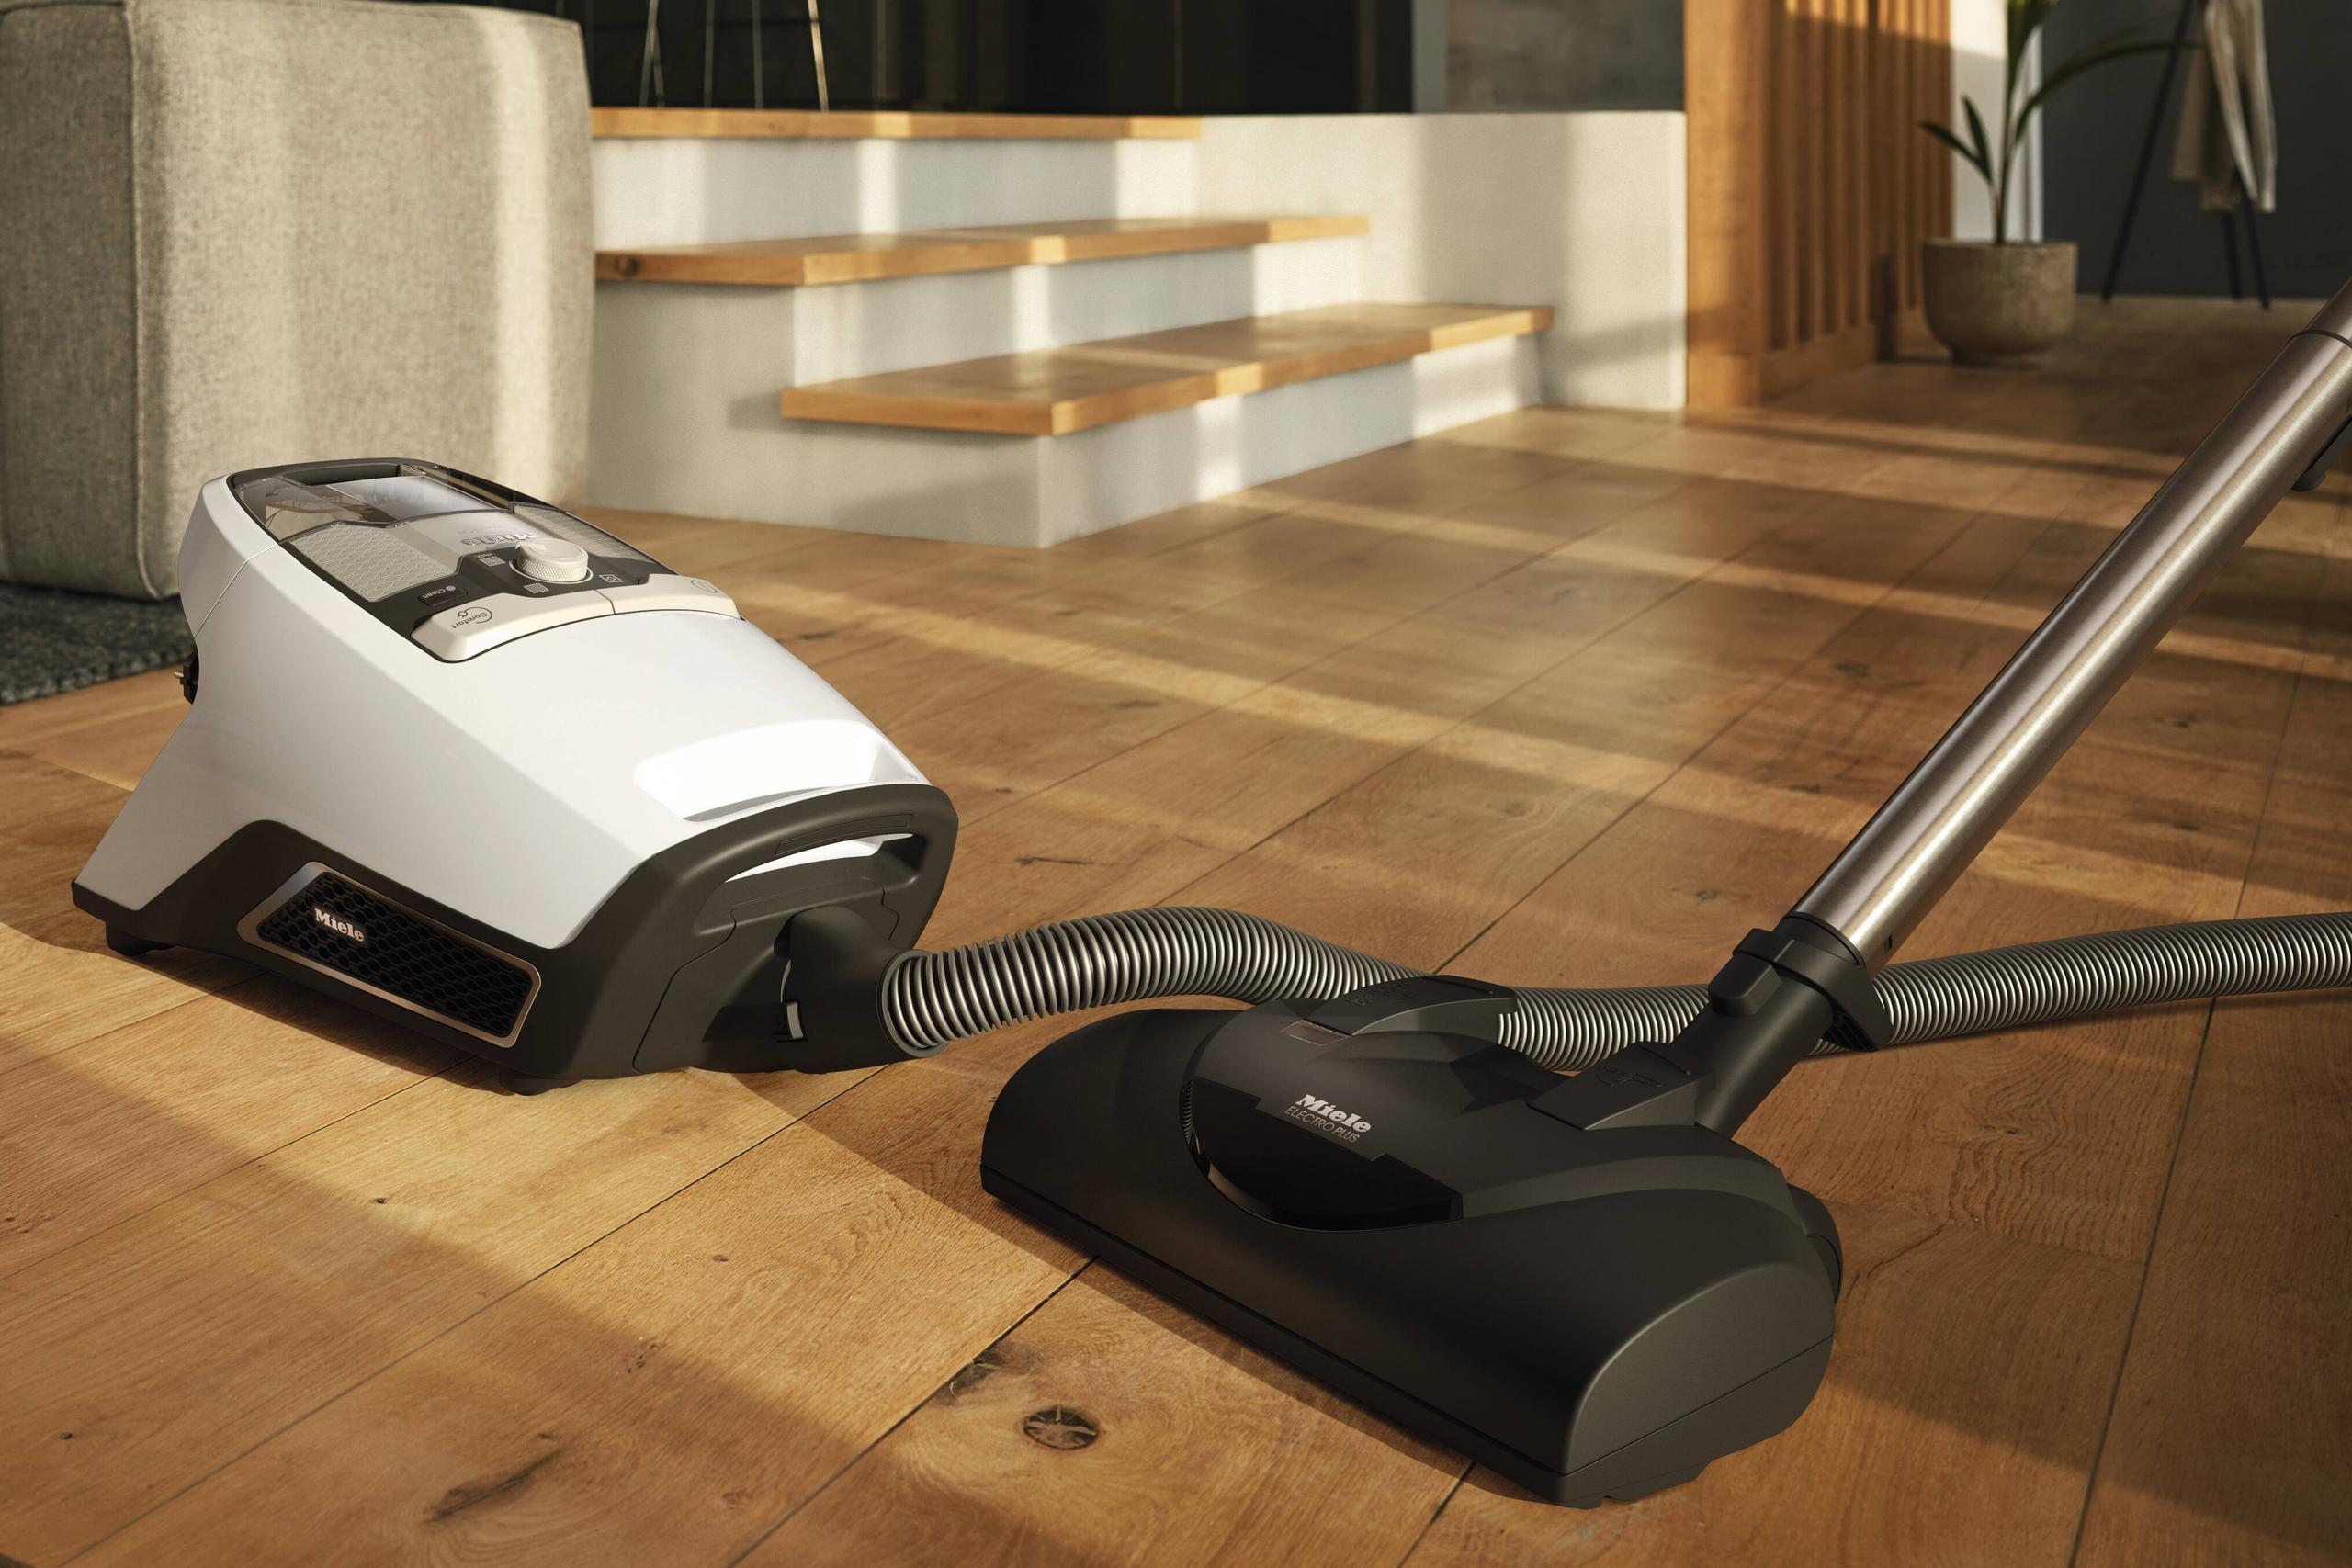 Miele BLIZZARDCX1CATDOGPOWERLINELOTUSWHITE Blizzard Cx1 Cat & Dog Powerline - Bagless Canister Vacuum Cleaners With Electrobrush For Thorough Cleaning Of Heavy-Duty Carpeting.